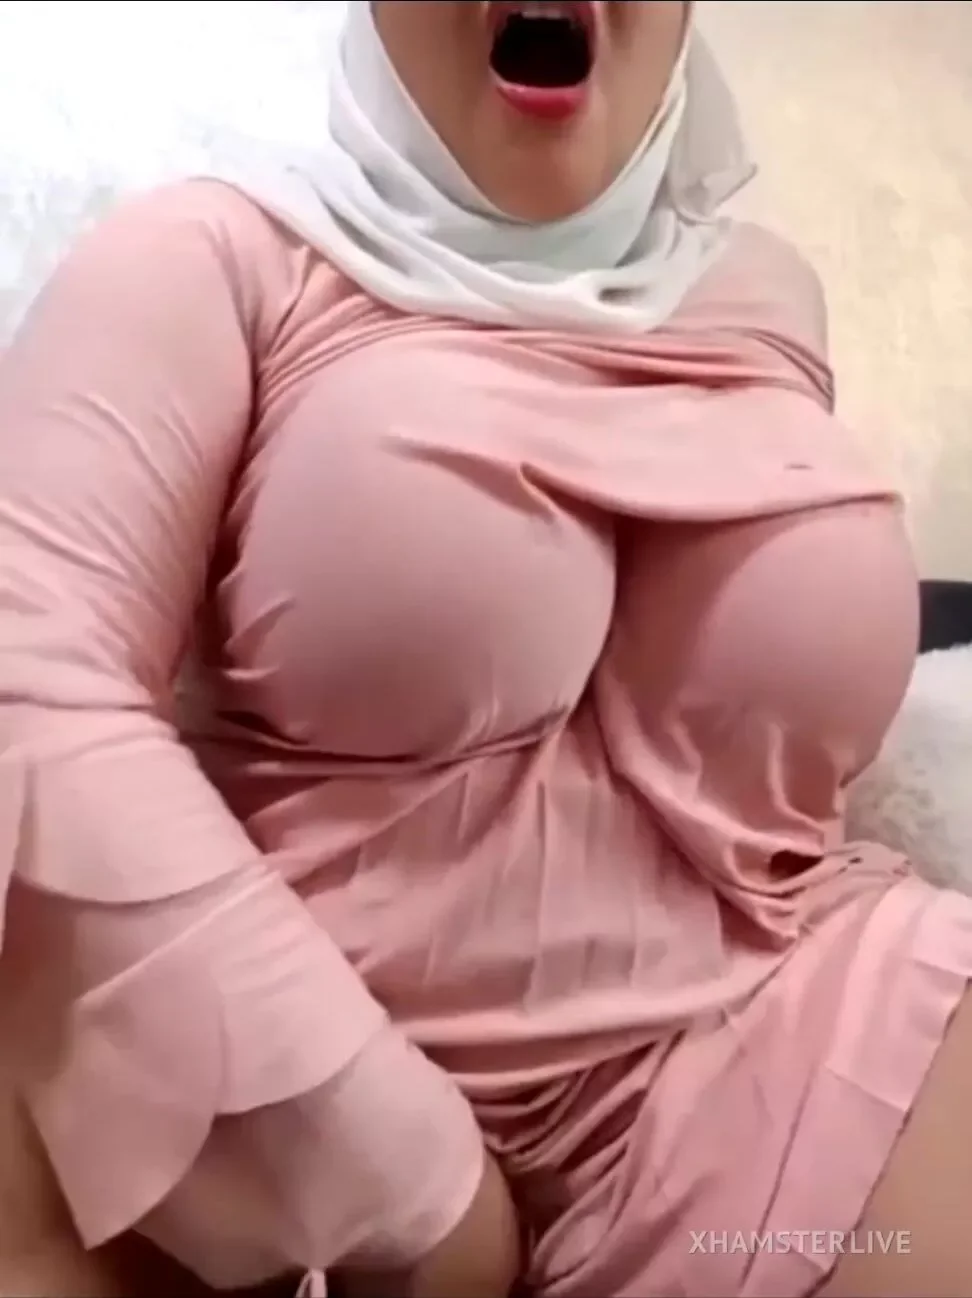 Watch Amal Arabic Big Boobs Camgirl Sucking Her Own Nipples And Rubbing Pussy Leaked Video